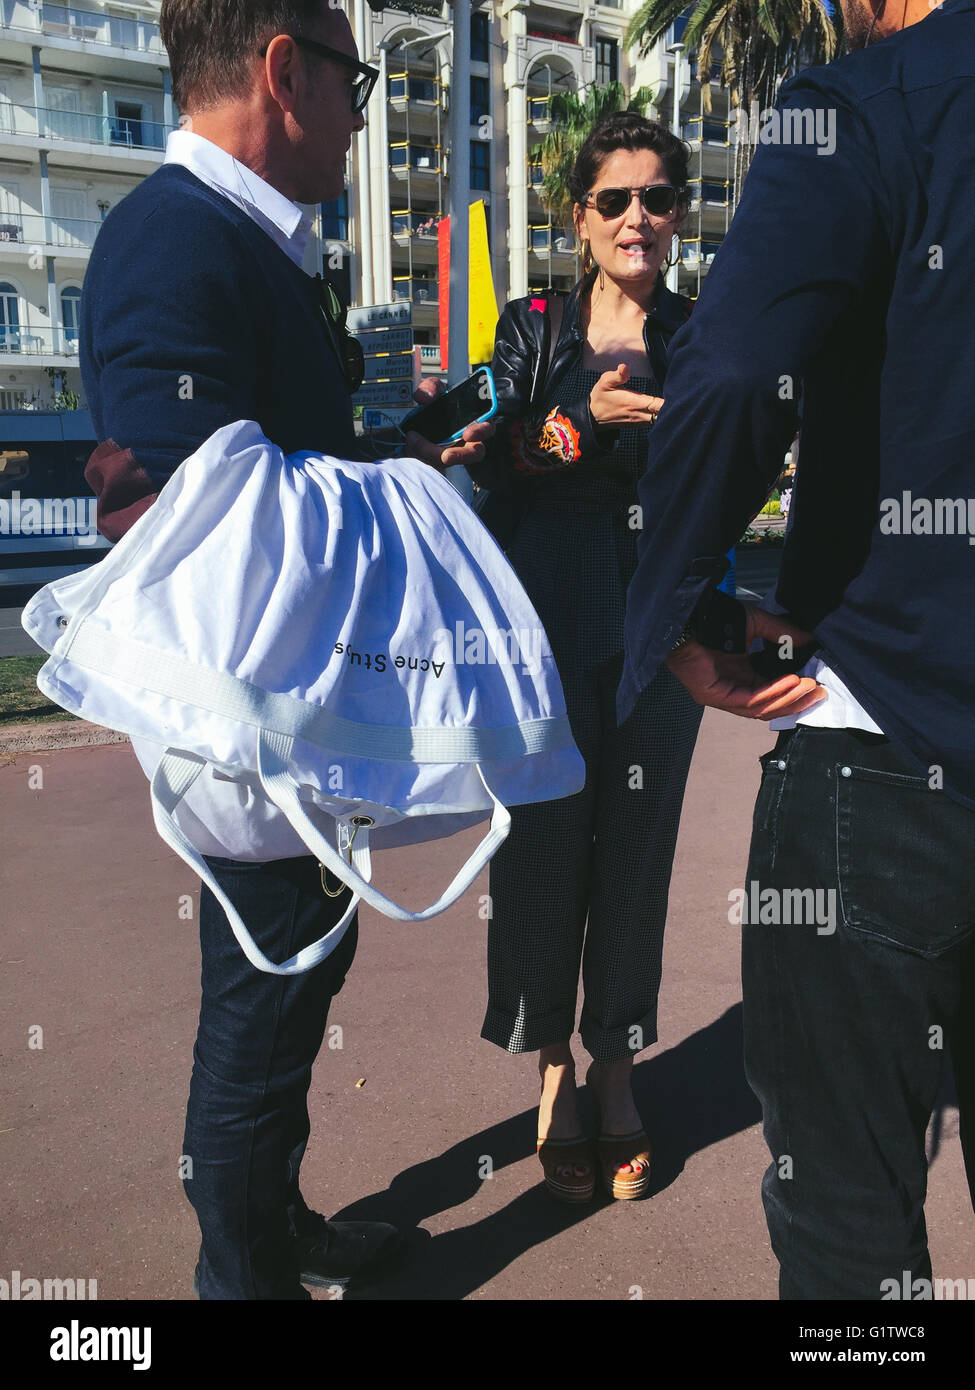 Cannes, France. 19th May, 2016. French actress Laetitia Casta spotted in the croiisette of Cannes, without any security around she was comfortable enough to mix in the crowd of Cannes Film Festival on the 19th May 2016. The photo has been taken with a mobile phone. Credit:  JBphotoeditorial/Alamy Live News Stock Photo